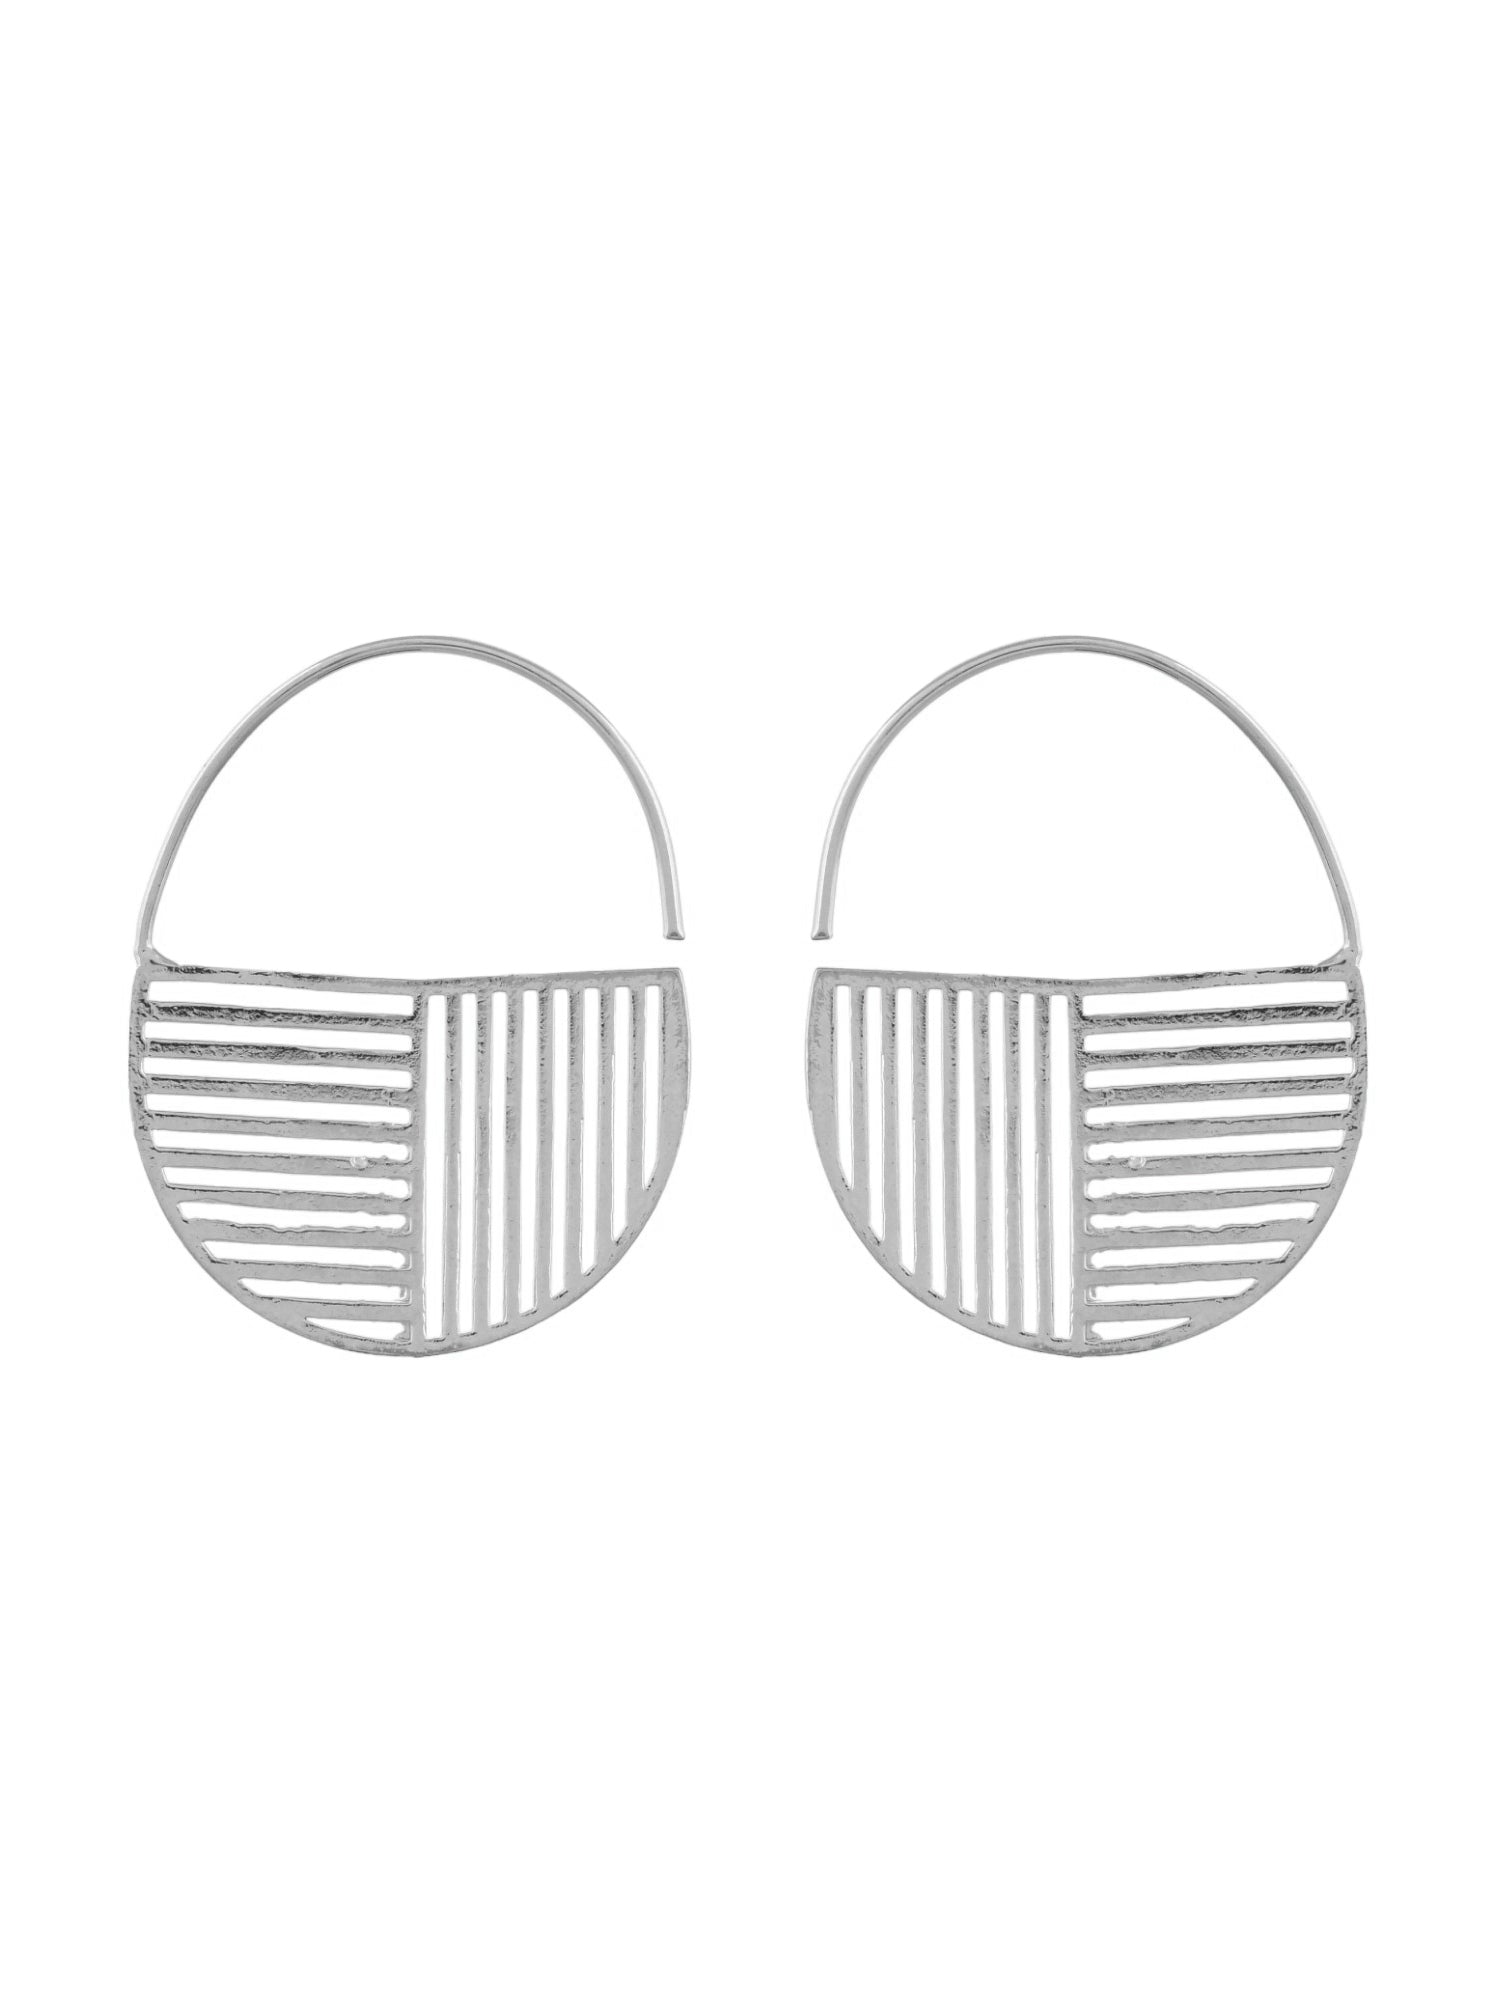 Elegant Silver Hoop Earrings with Unique Striped Design